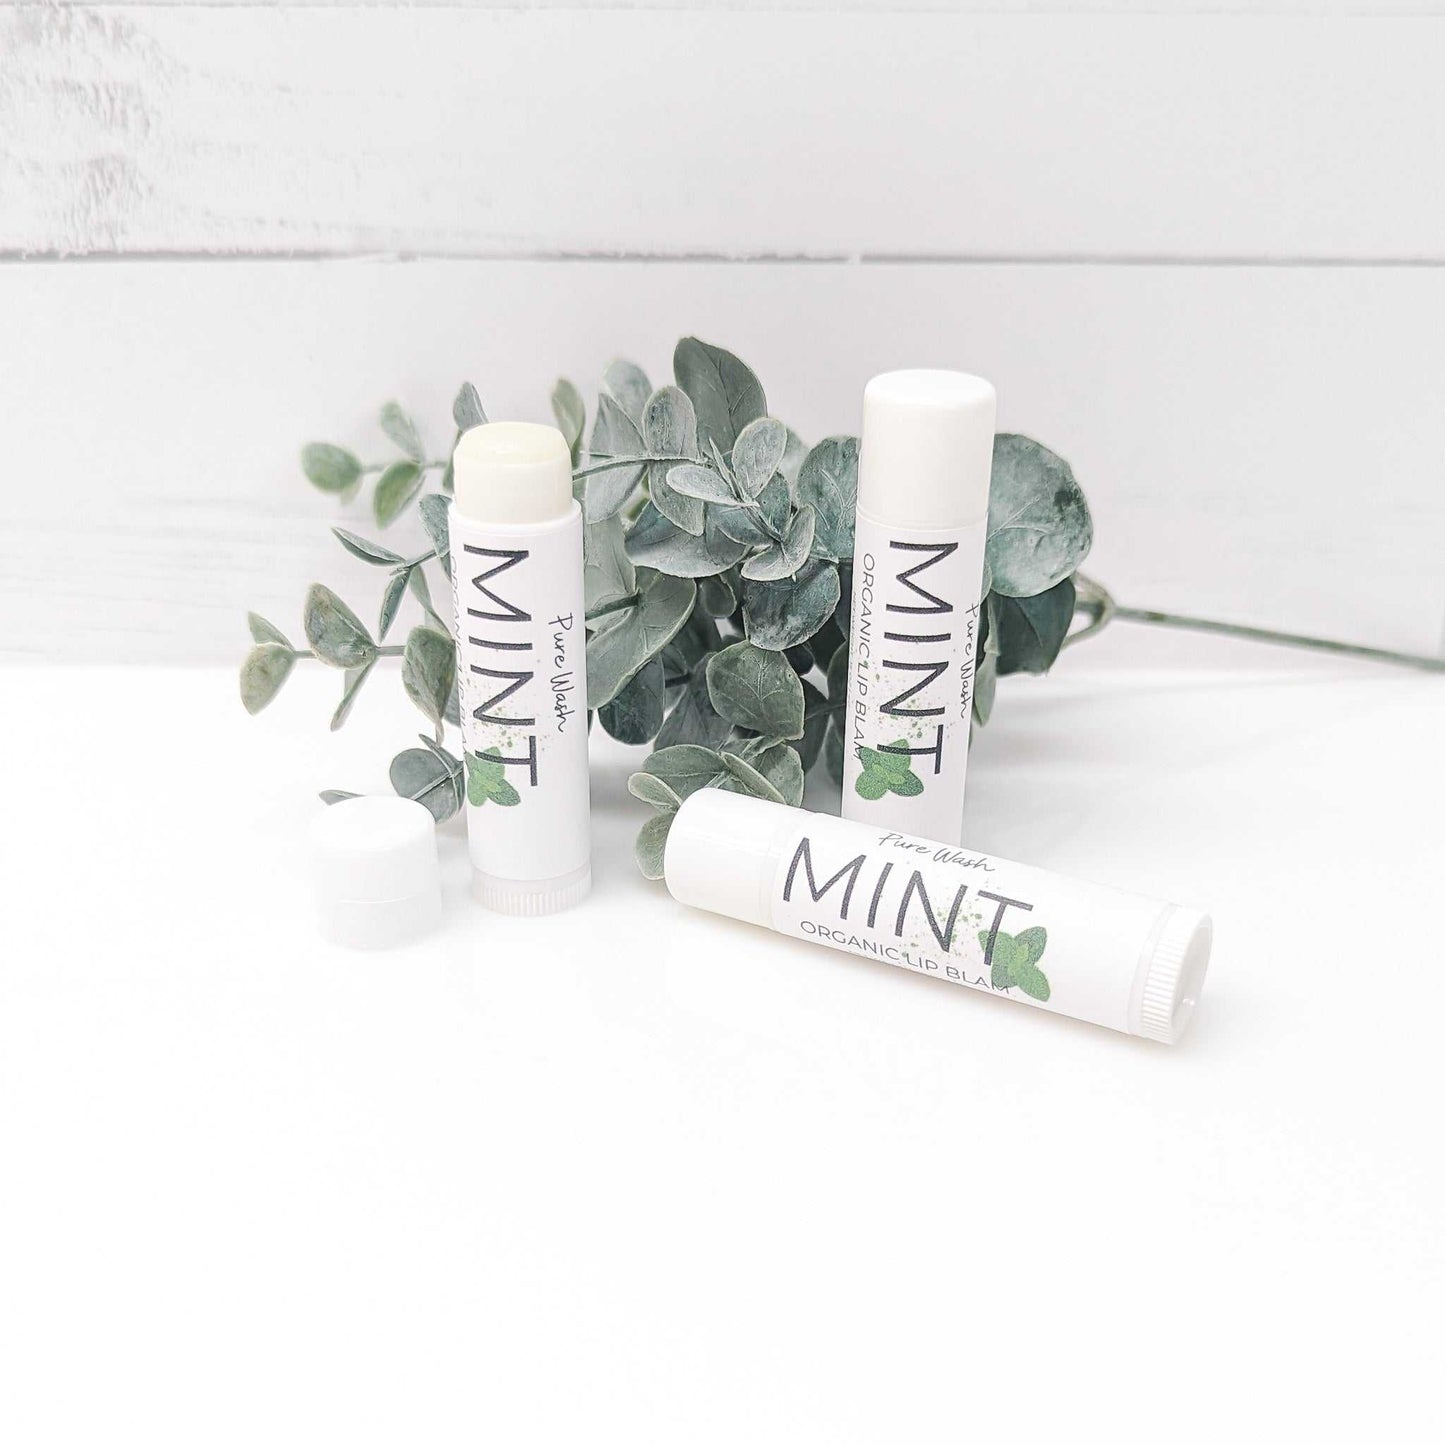 Minty Lip Balm with premium ingredients for rejuvenating lip care | CG Pure Wash.